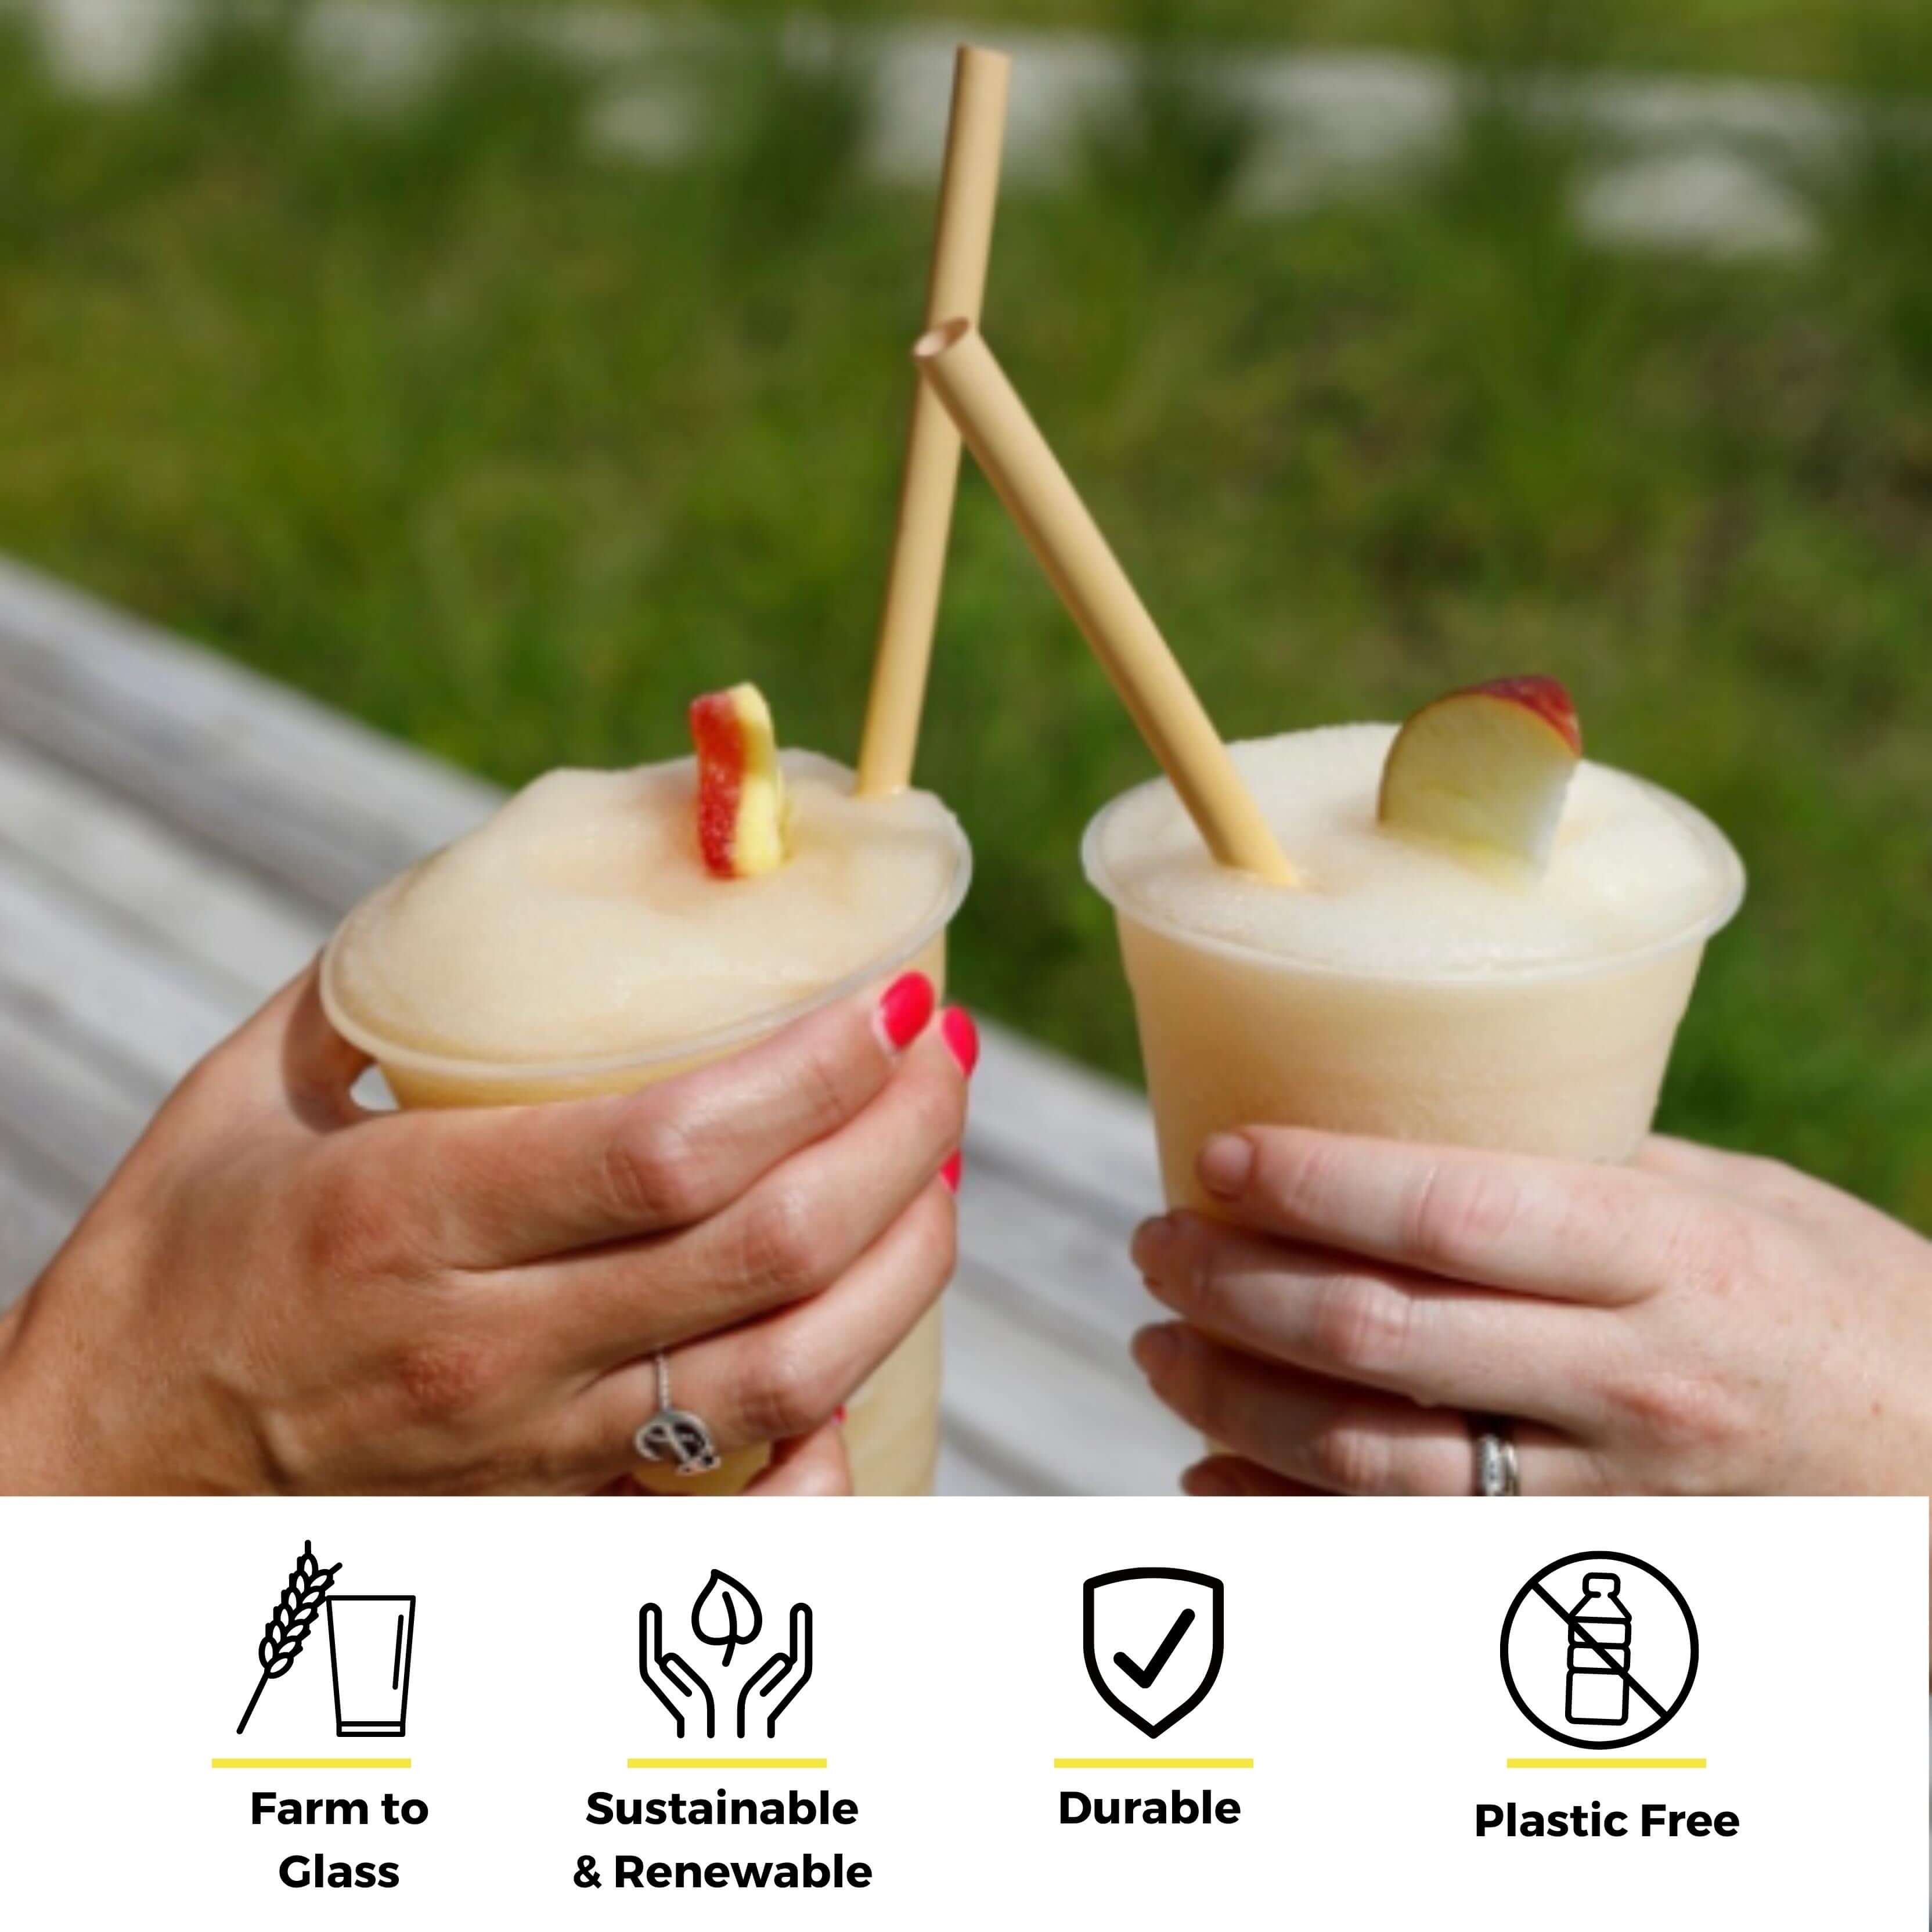 Two people are holding frozen drinks in clear cups garnished with apple slices. Both drinks feature biodegradable bamboo straws. One person has pink nail polish, and the other is wearing a silver ring. The image emphasizes sustainability, with icons beneath representing 